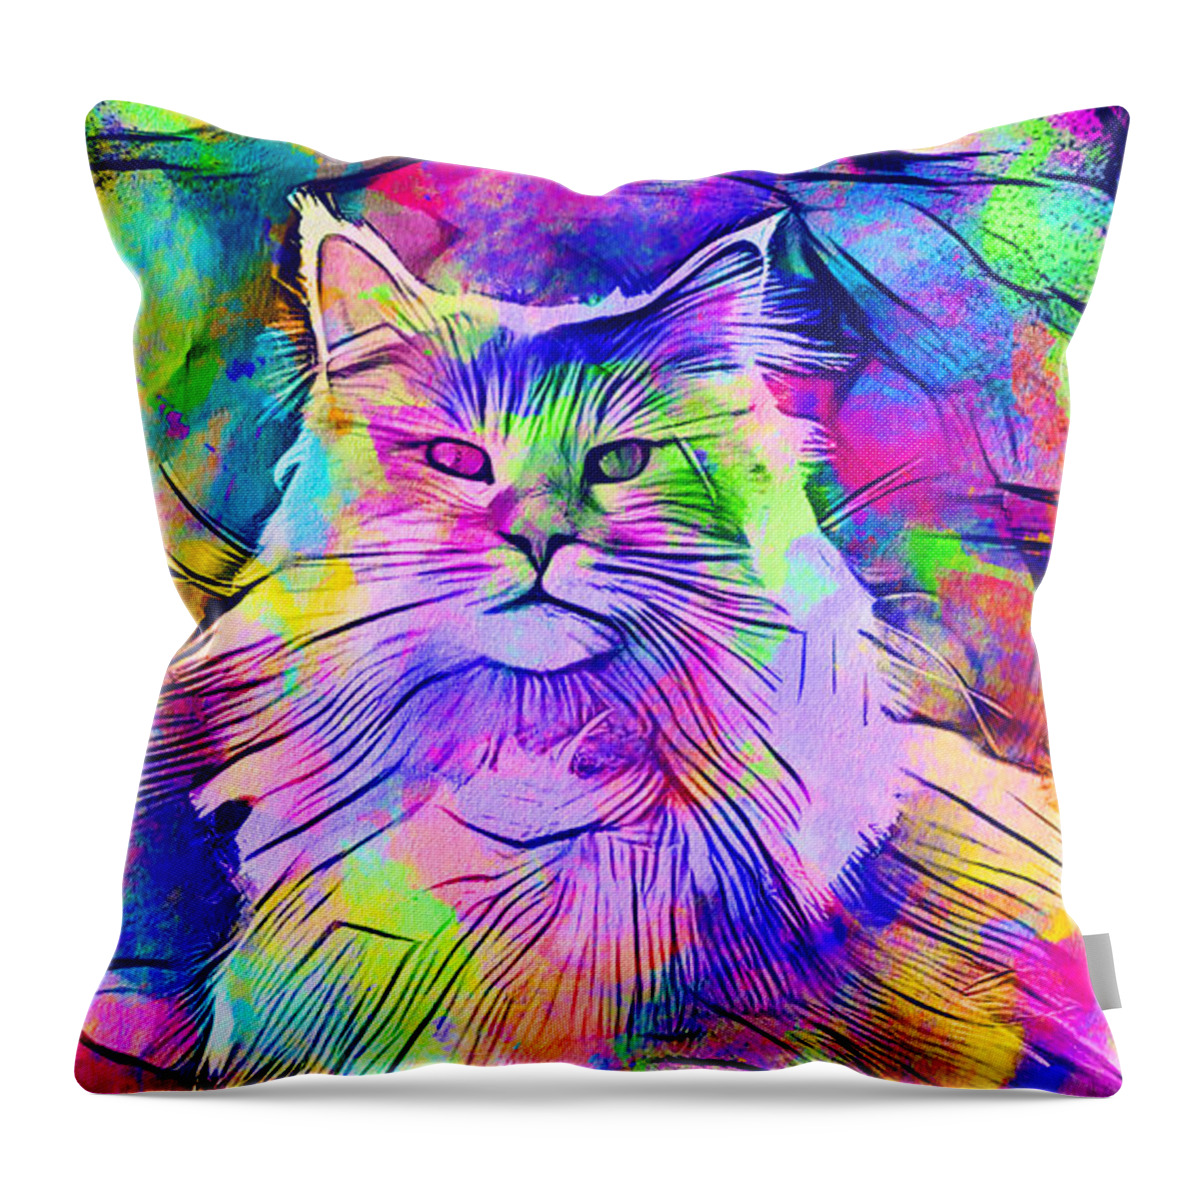 Maine Coon Throw Pillow featuring the digital art Maine Coon cat looking at camera - colorful lines digital painting by Nicko Prints